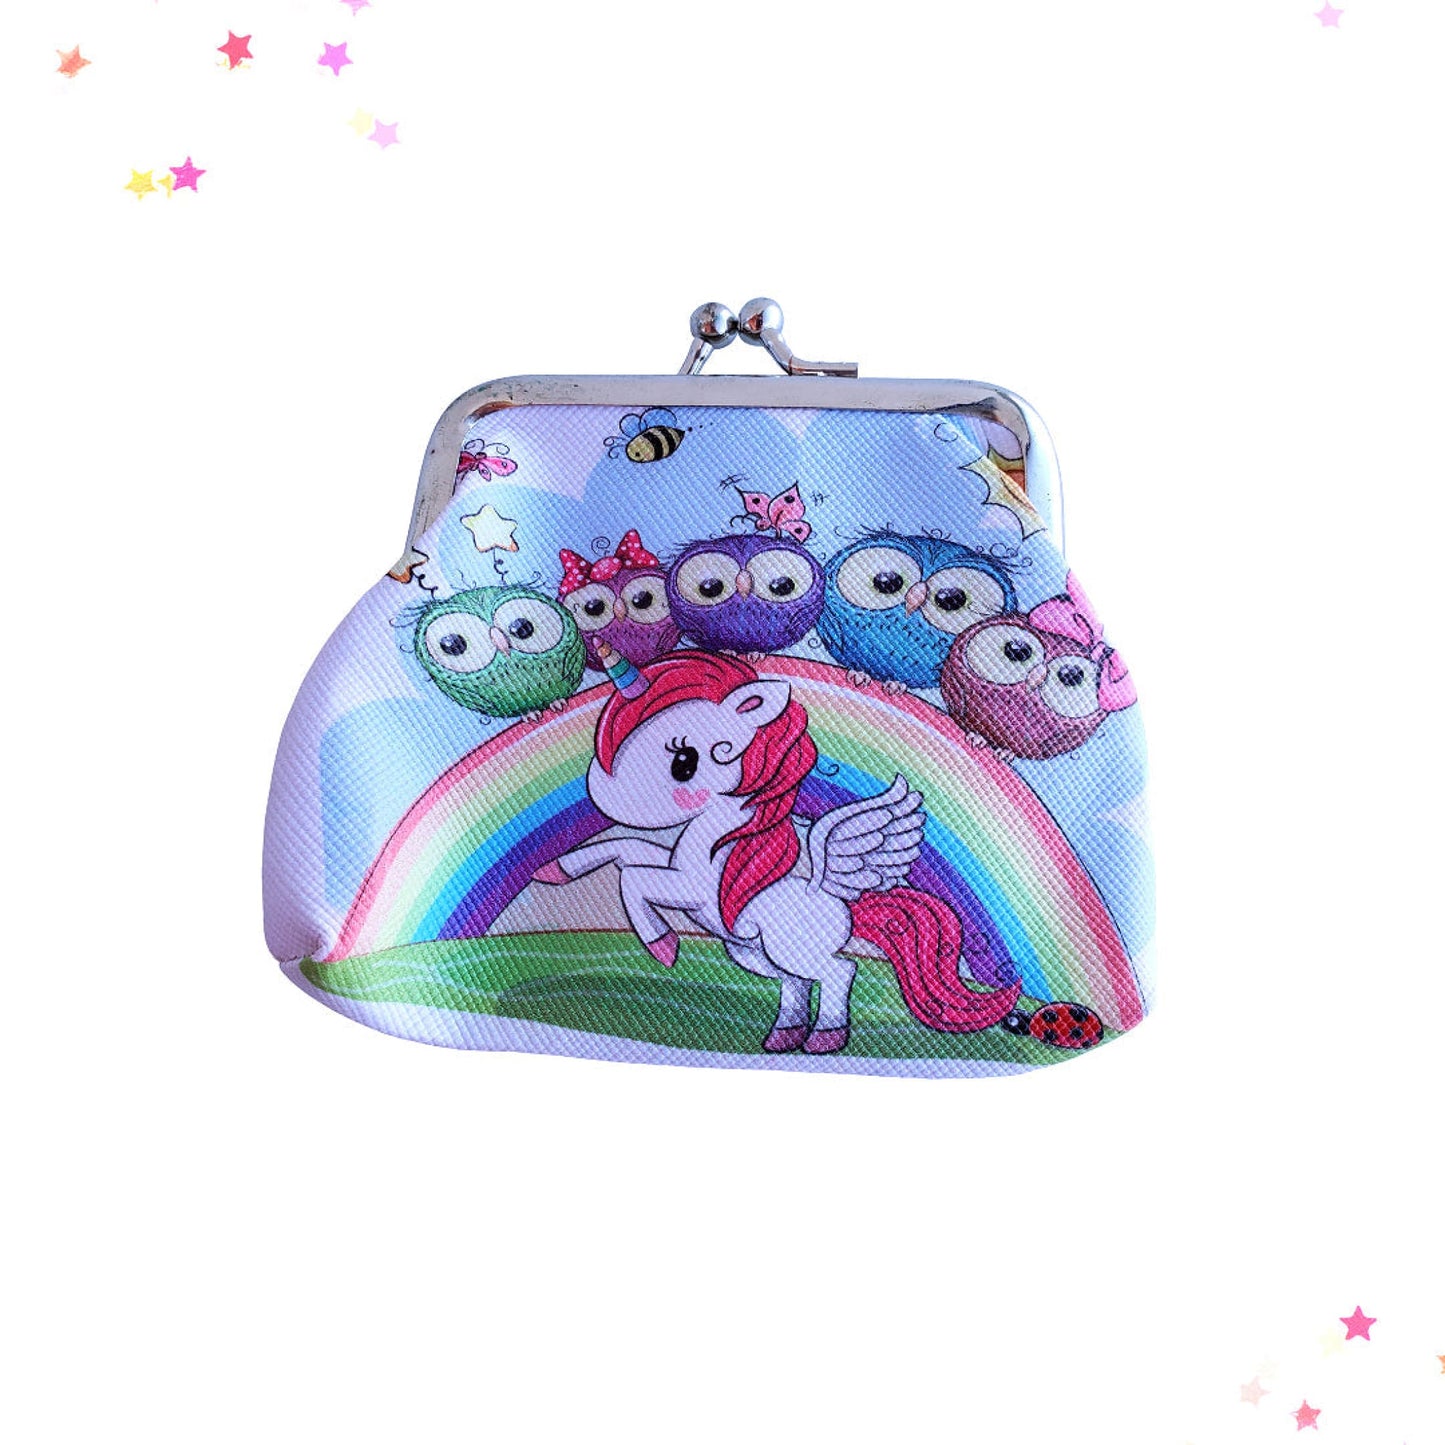 Easy-Open Unicorn Coin Purse in Owl Friends from Confetti Kitty, Only 4.99